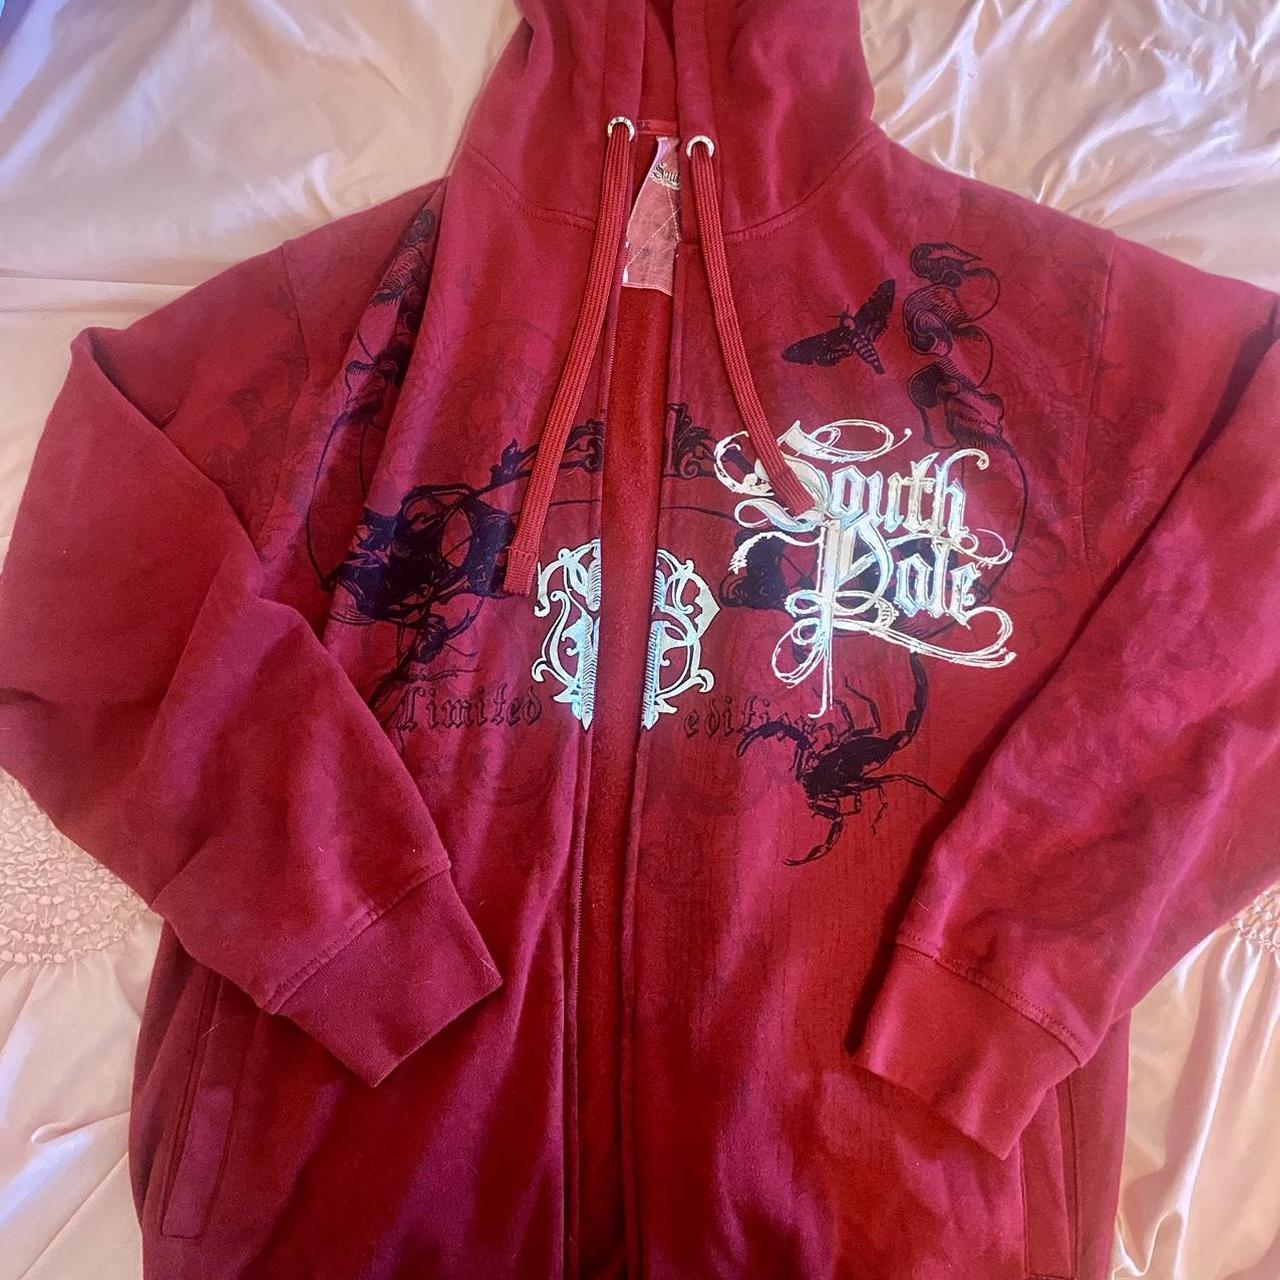 South Pole vintage and rare maroon/red jacket!! Has... - Depop